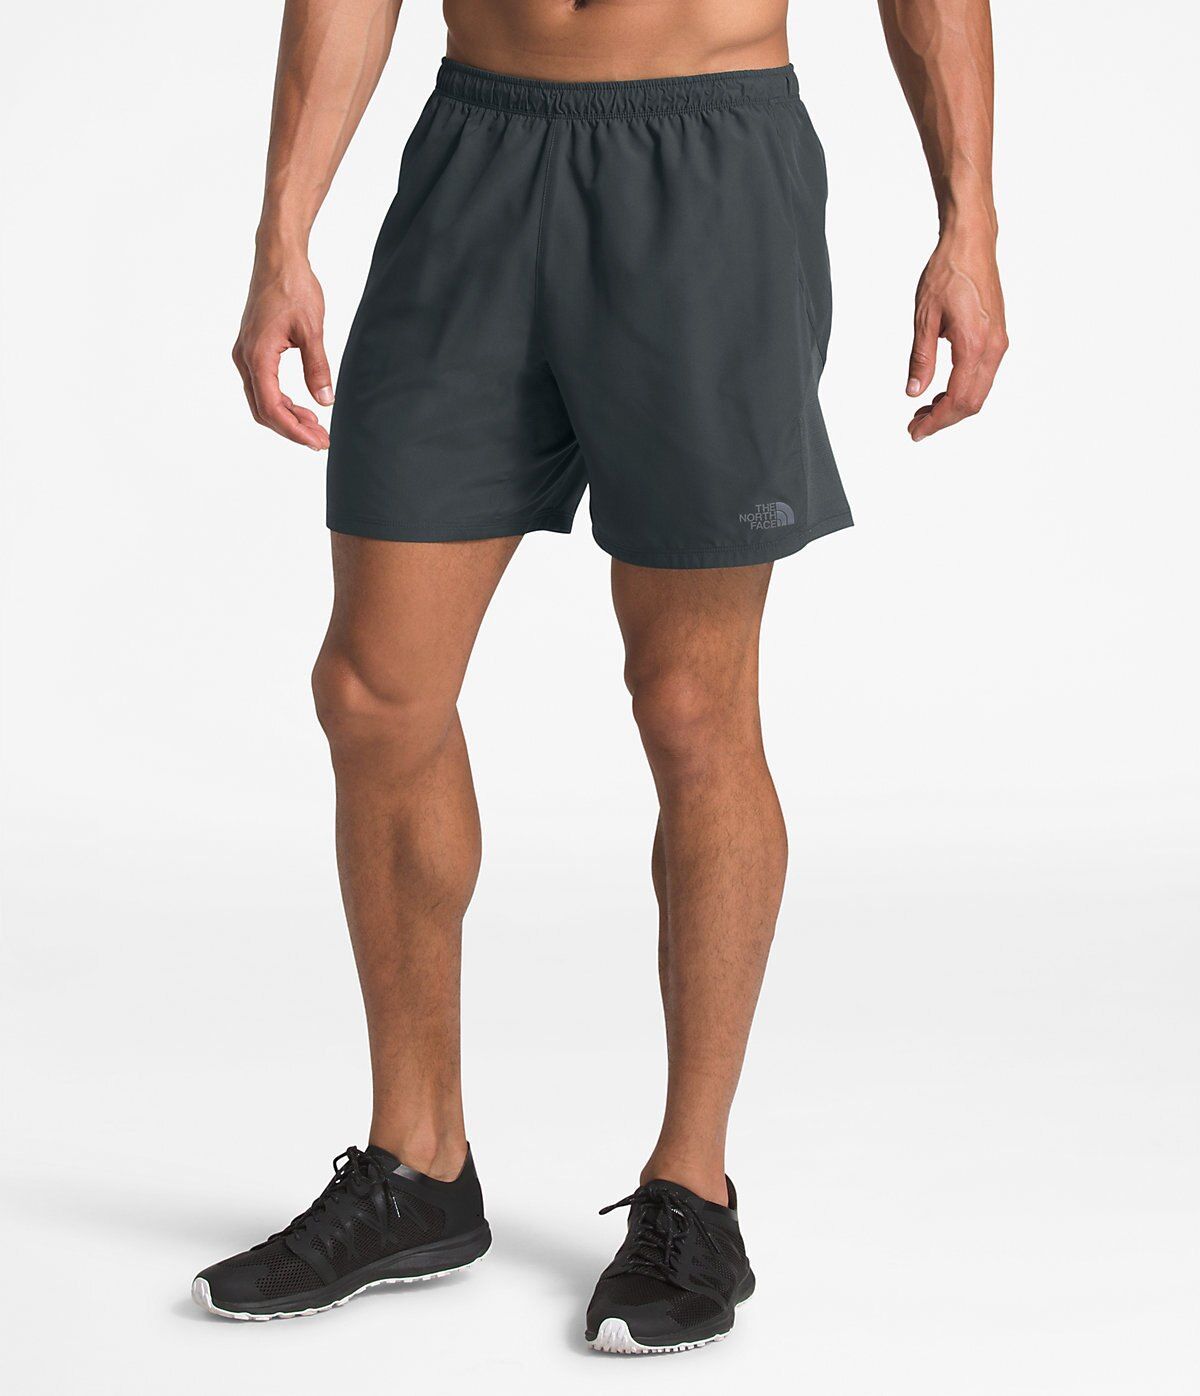 MEN'S AMBITION SHORTS | The North Face -   thin fitness Men